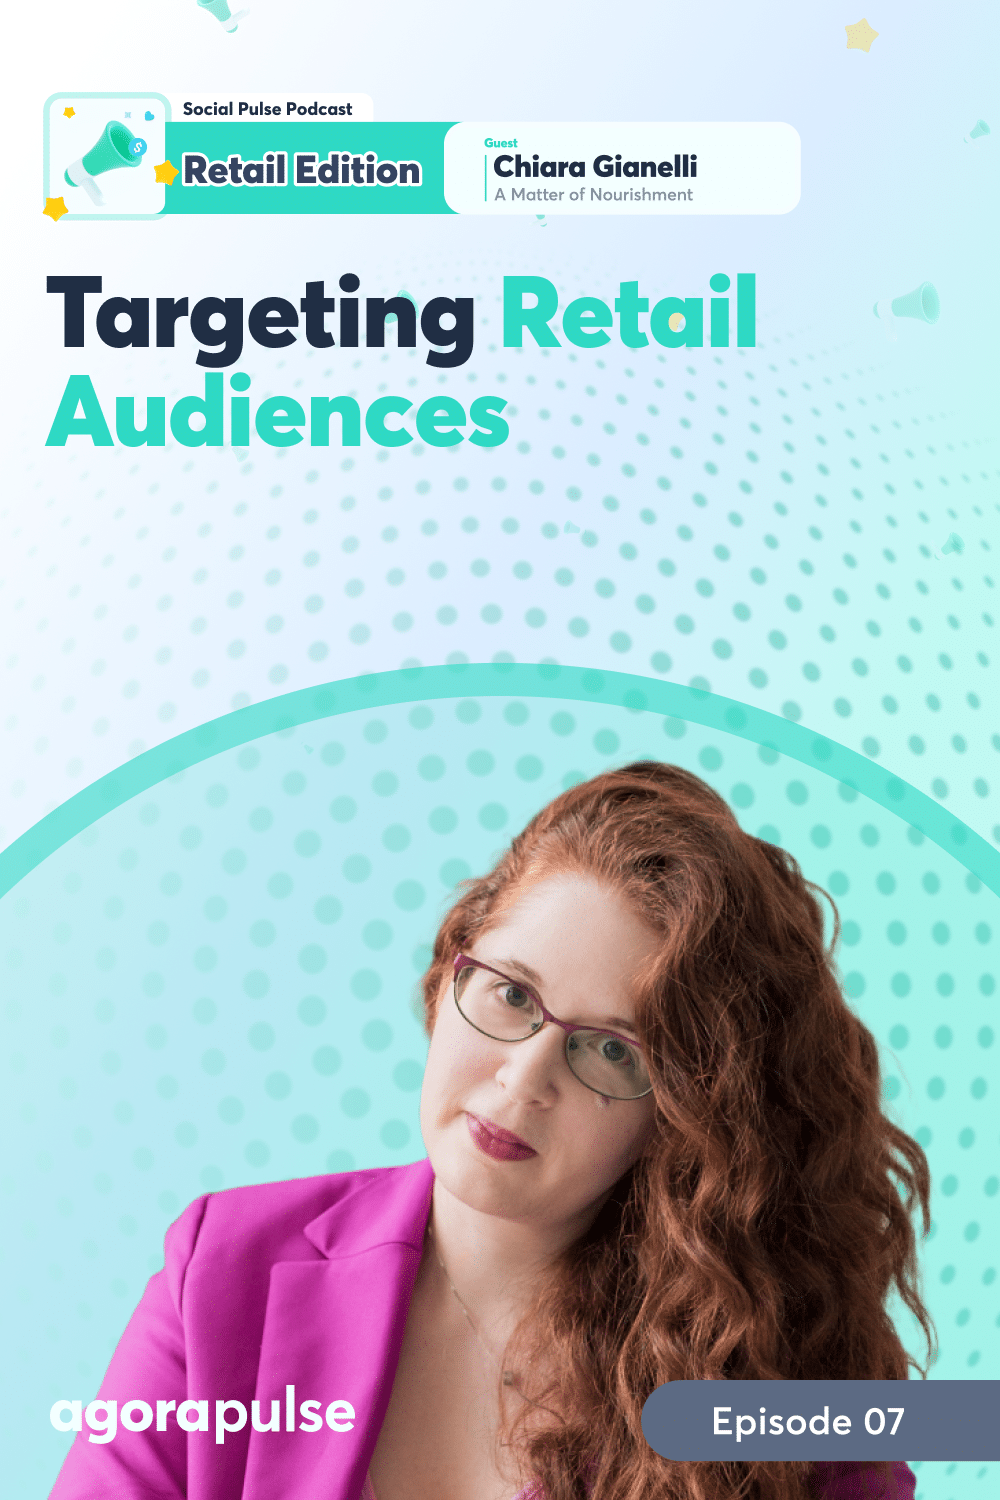 How to Identify and Target Retail Audiences on Social Media